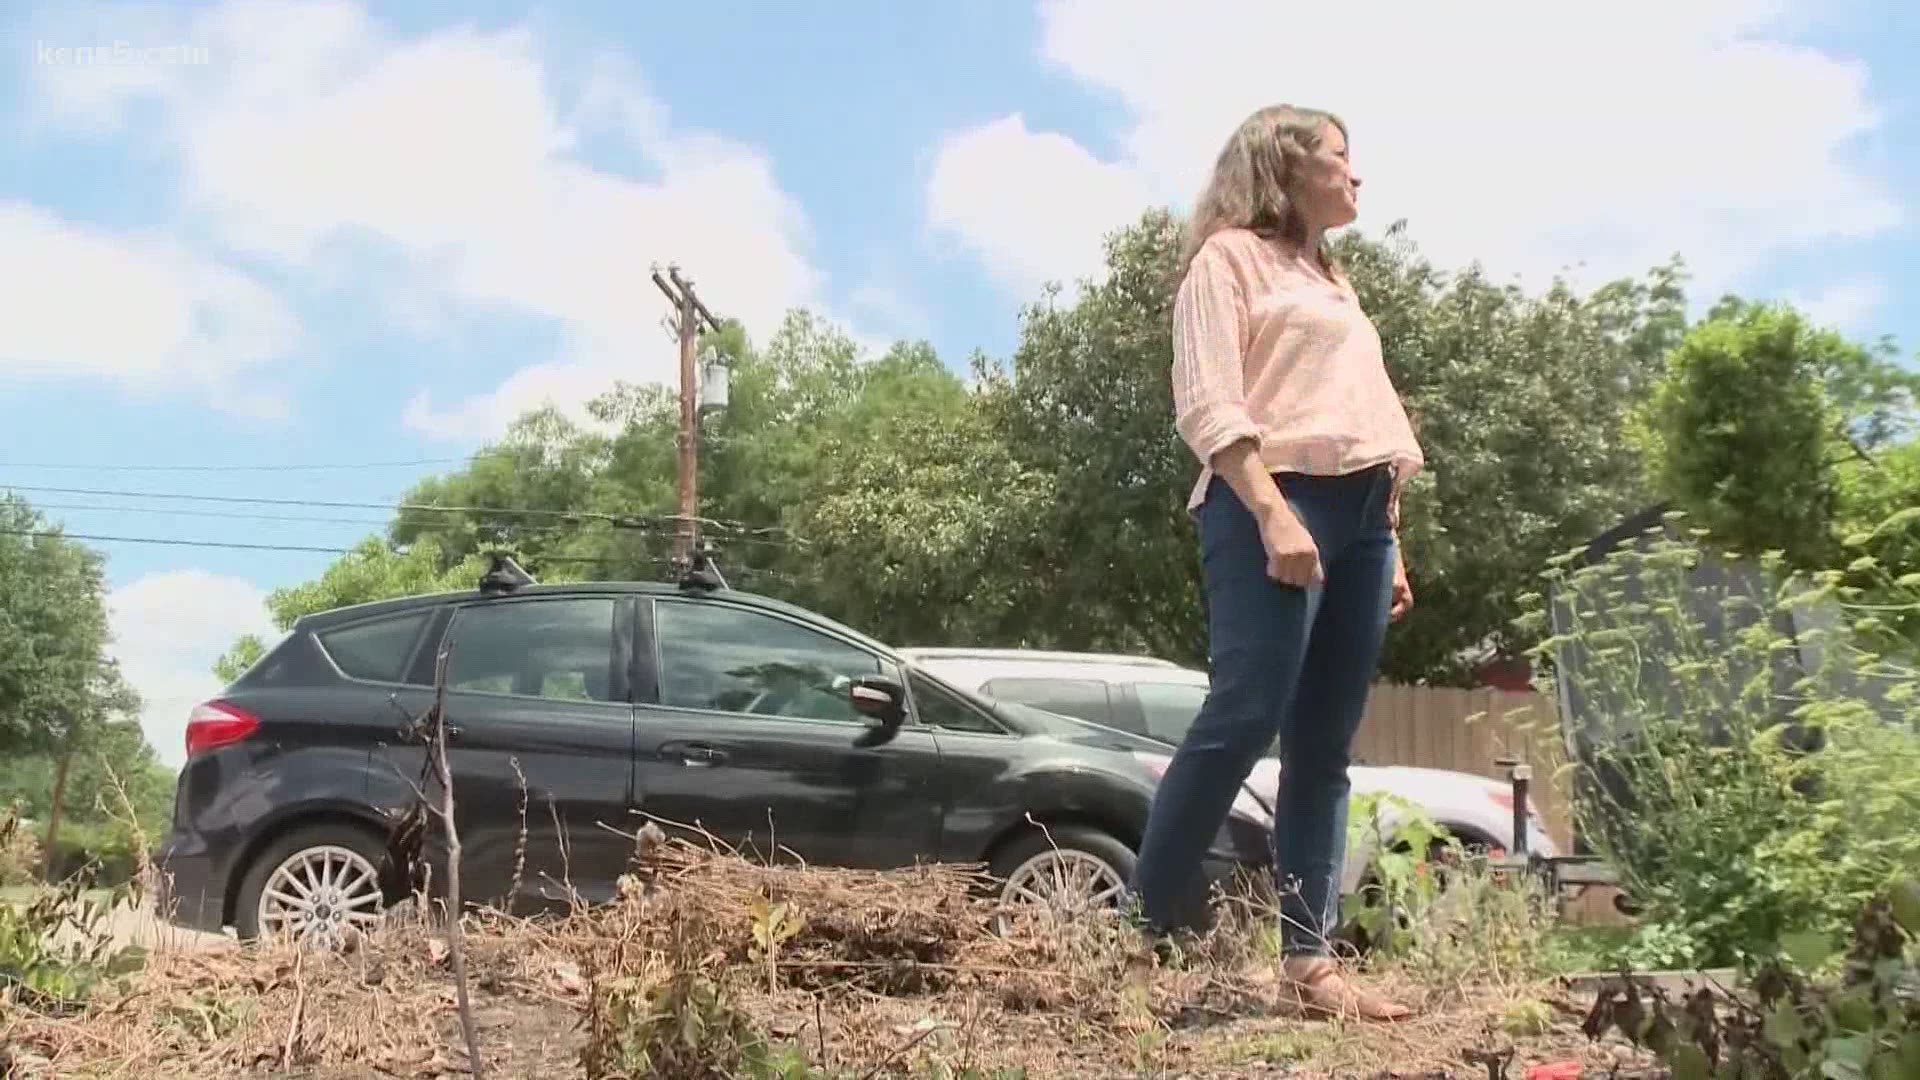 In a span of 24 hours, nearly two dozen neighbors said they found a dead patch in their yards.